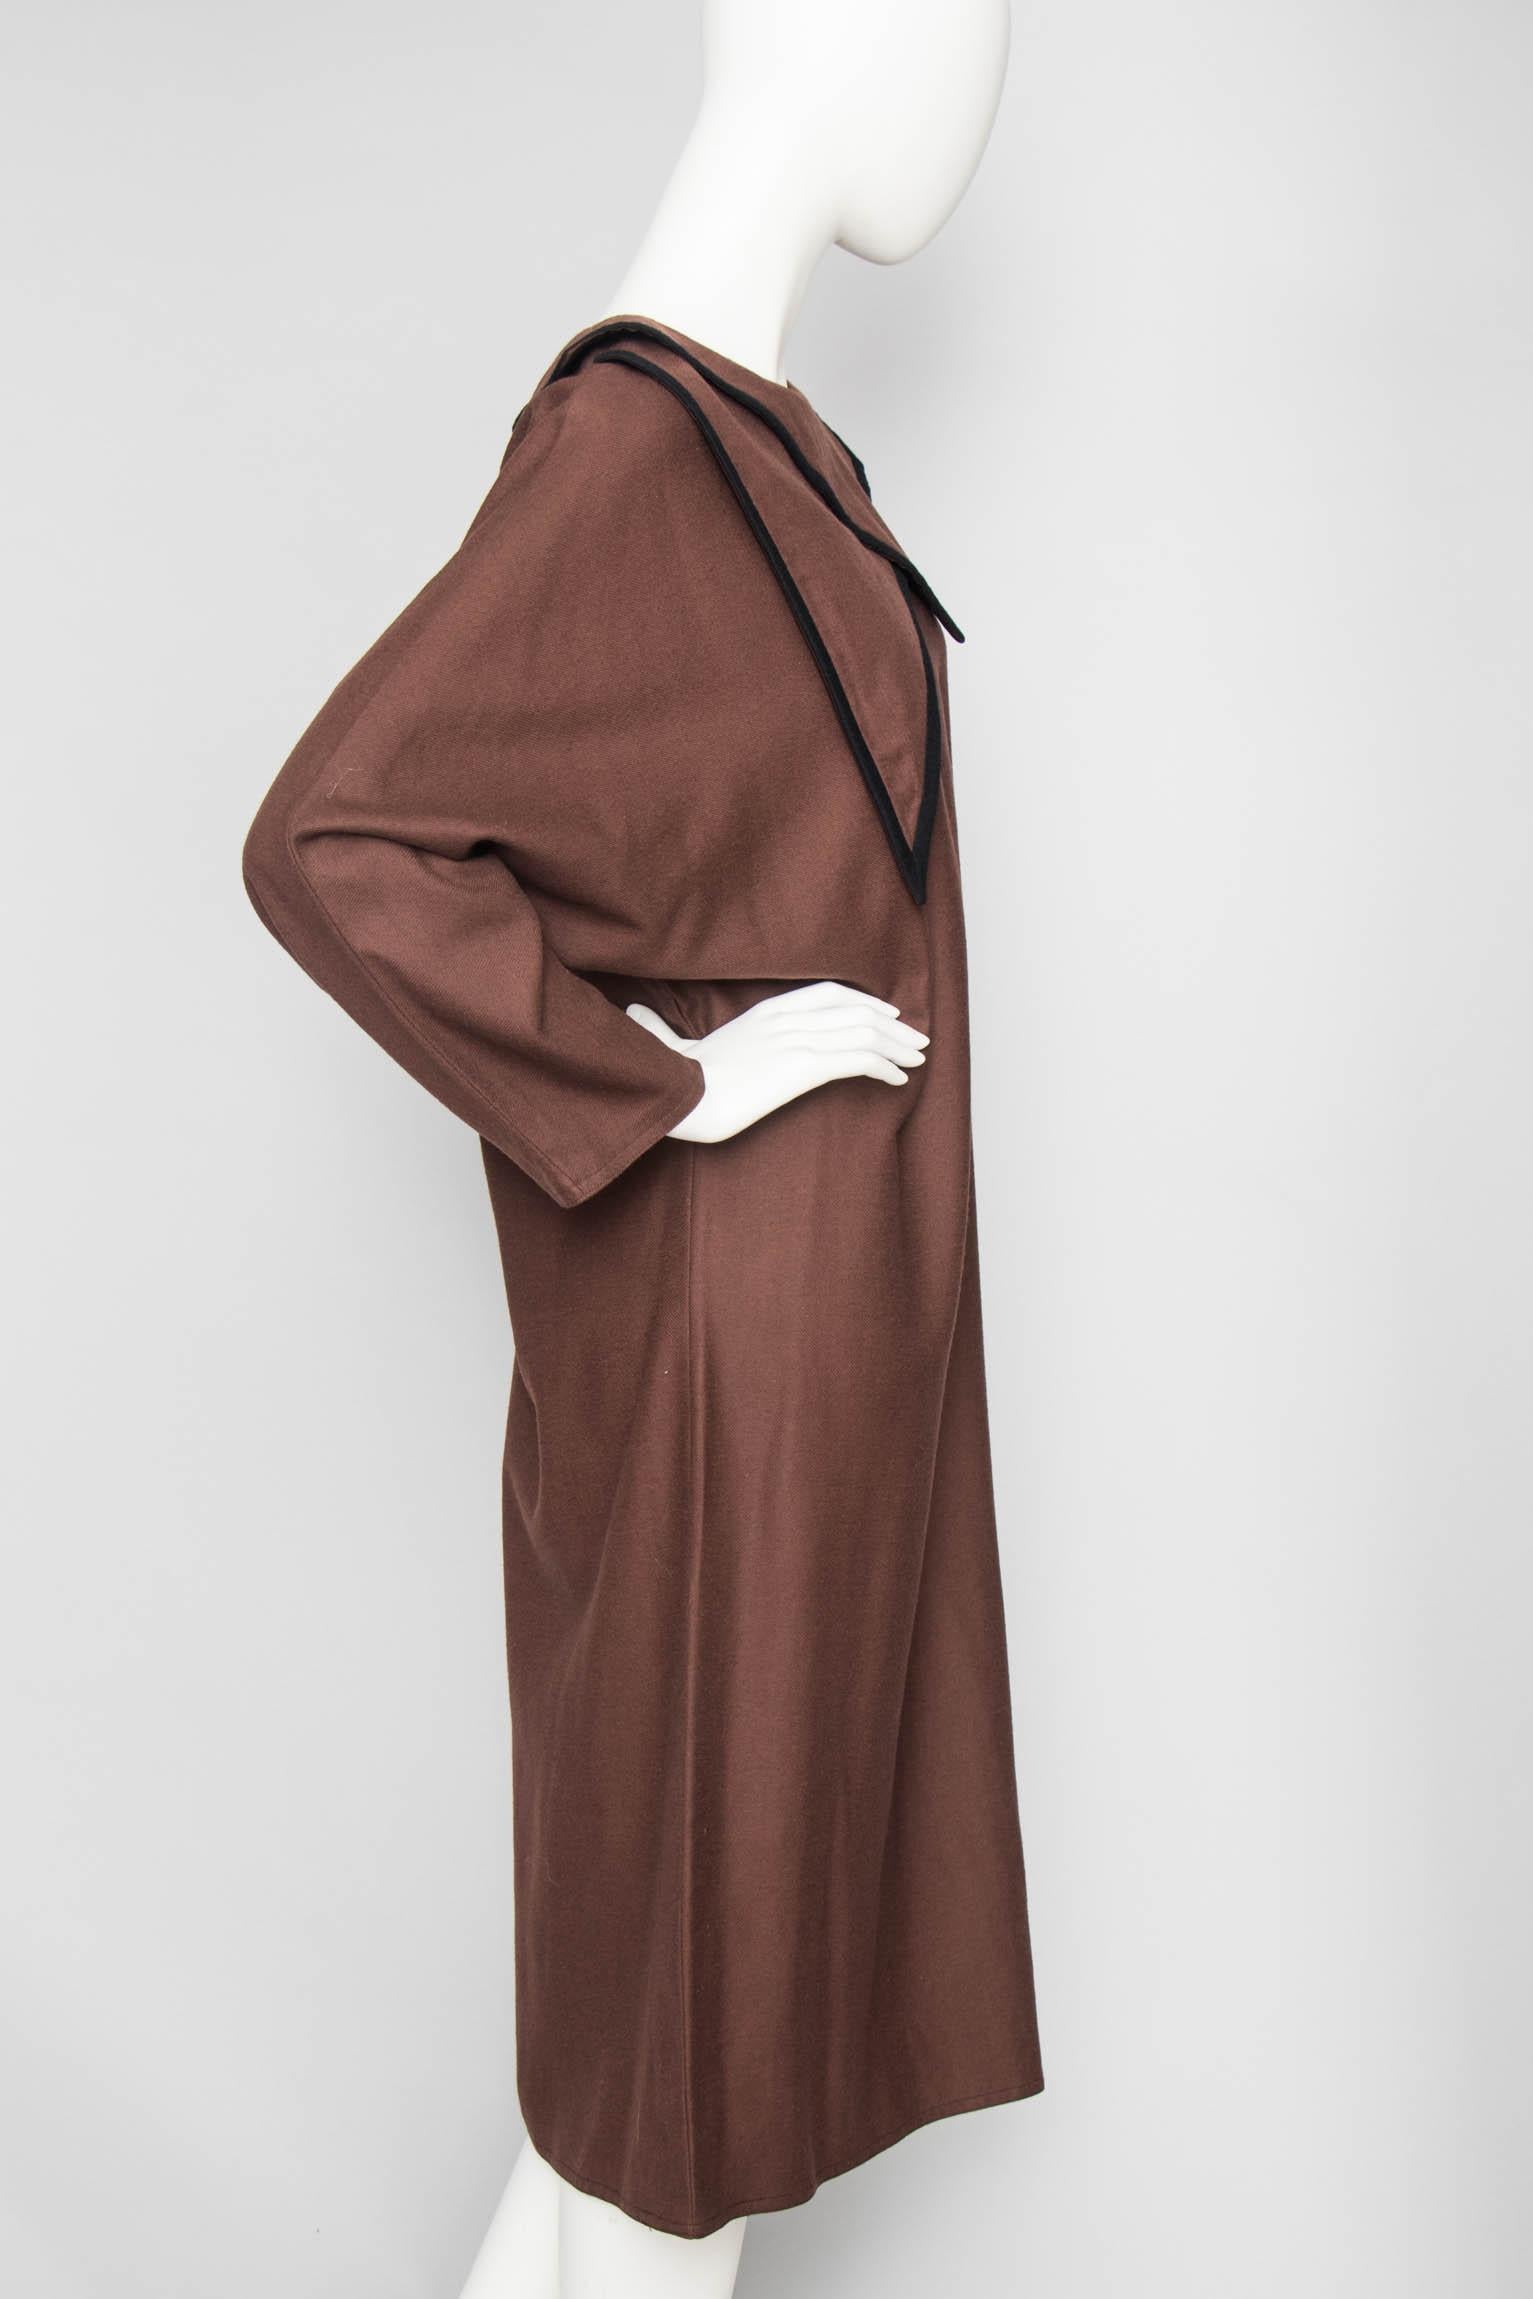 Chloé Vintage Brown Wool Dress with Black Trim And Pointed Collar In Good Condition For Sale In Copenhagen, DK